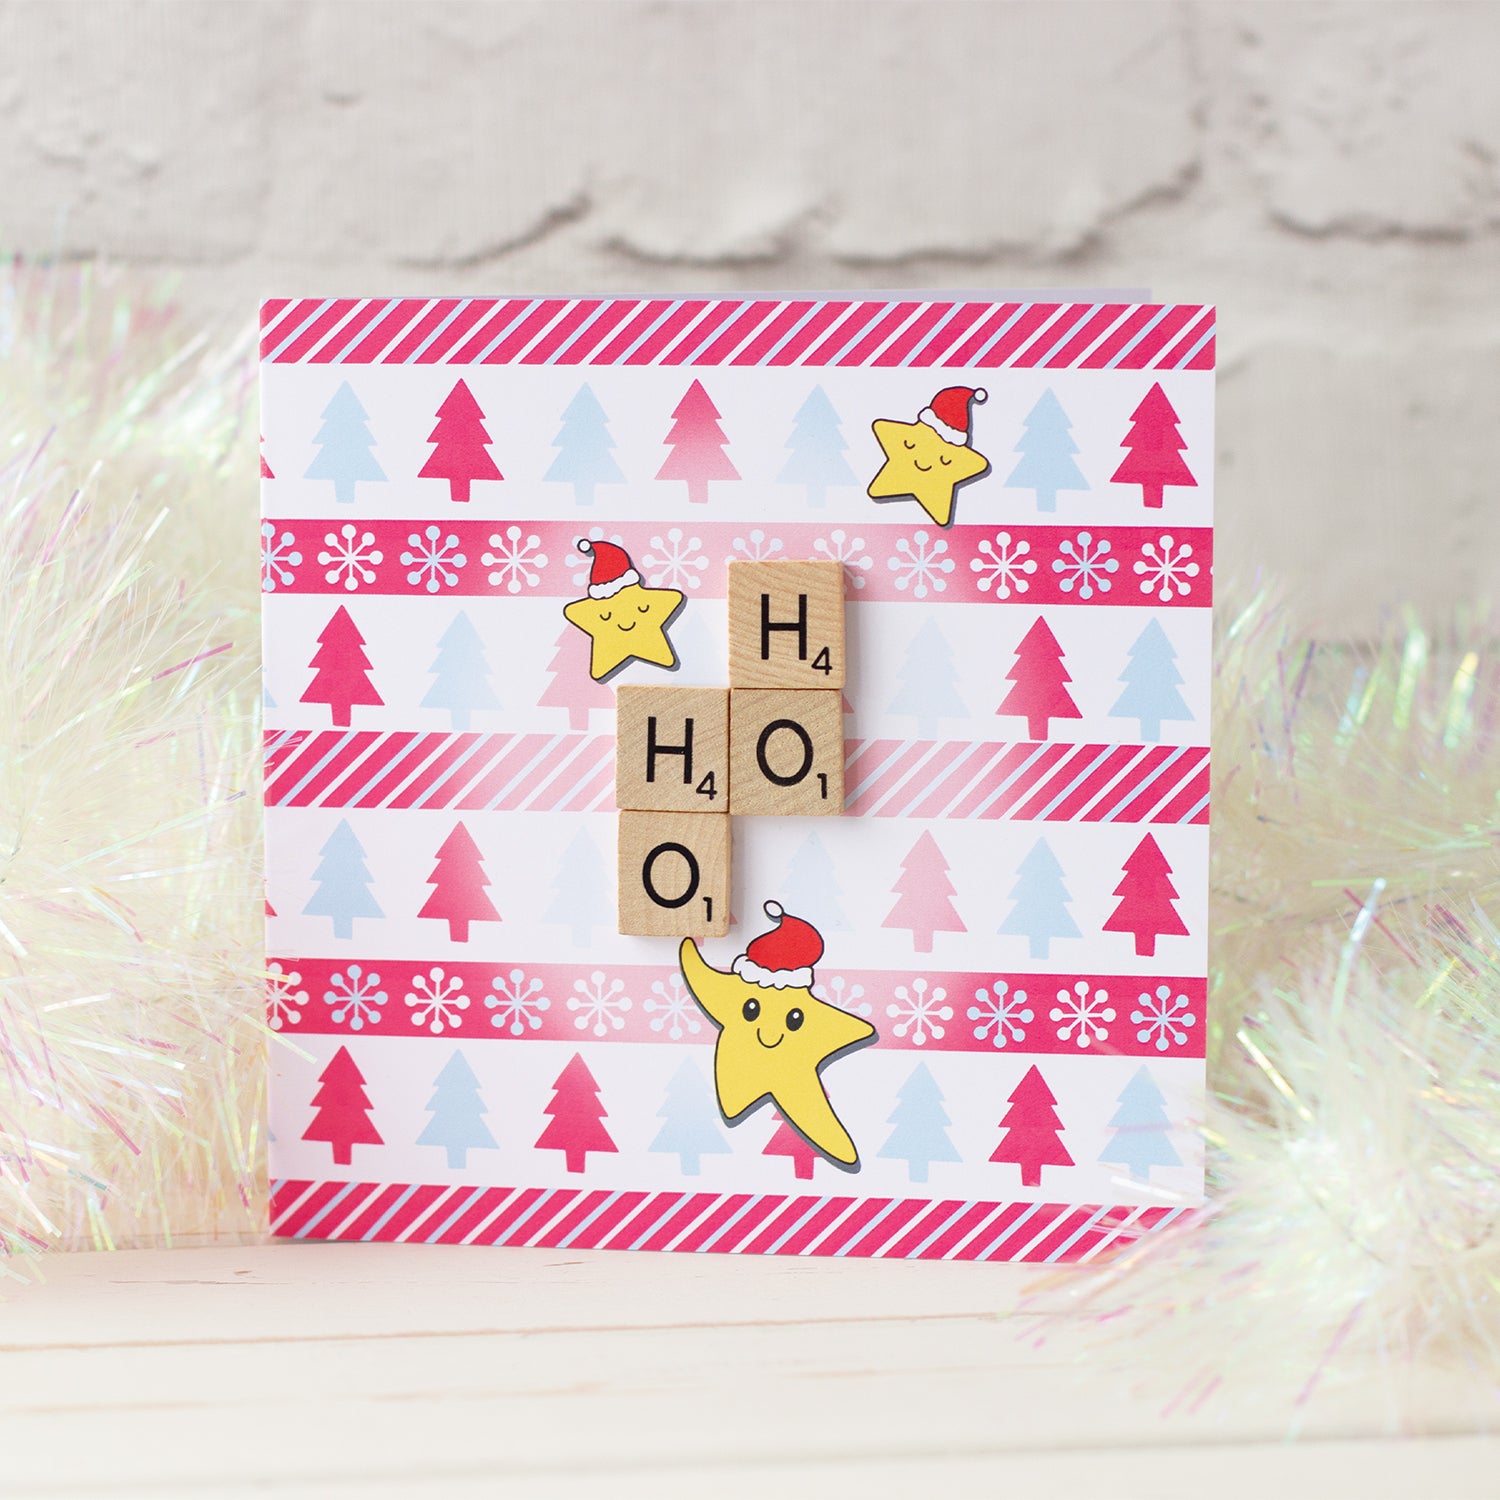 Fun Scrabble Inspired Christmas Card with Kawaii style illustration